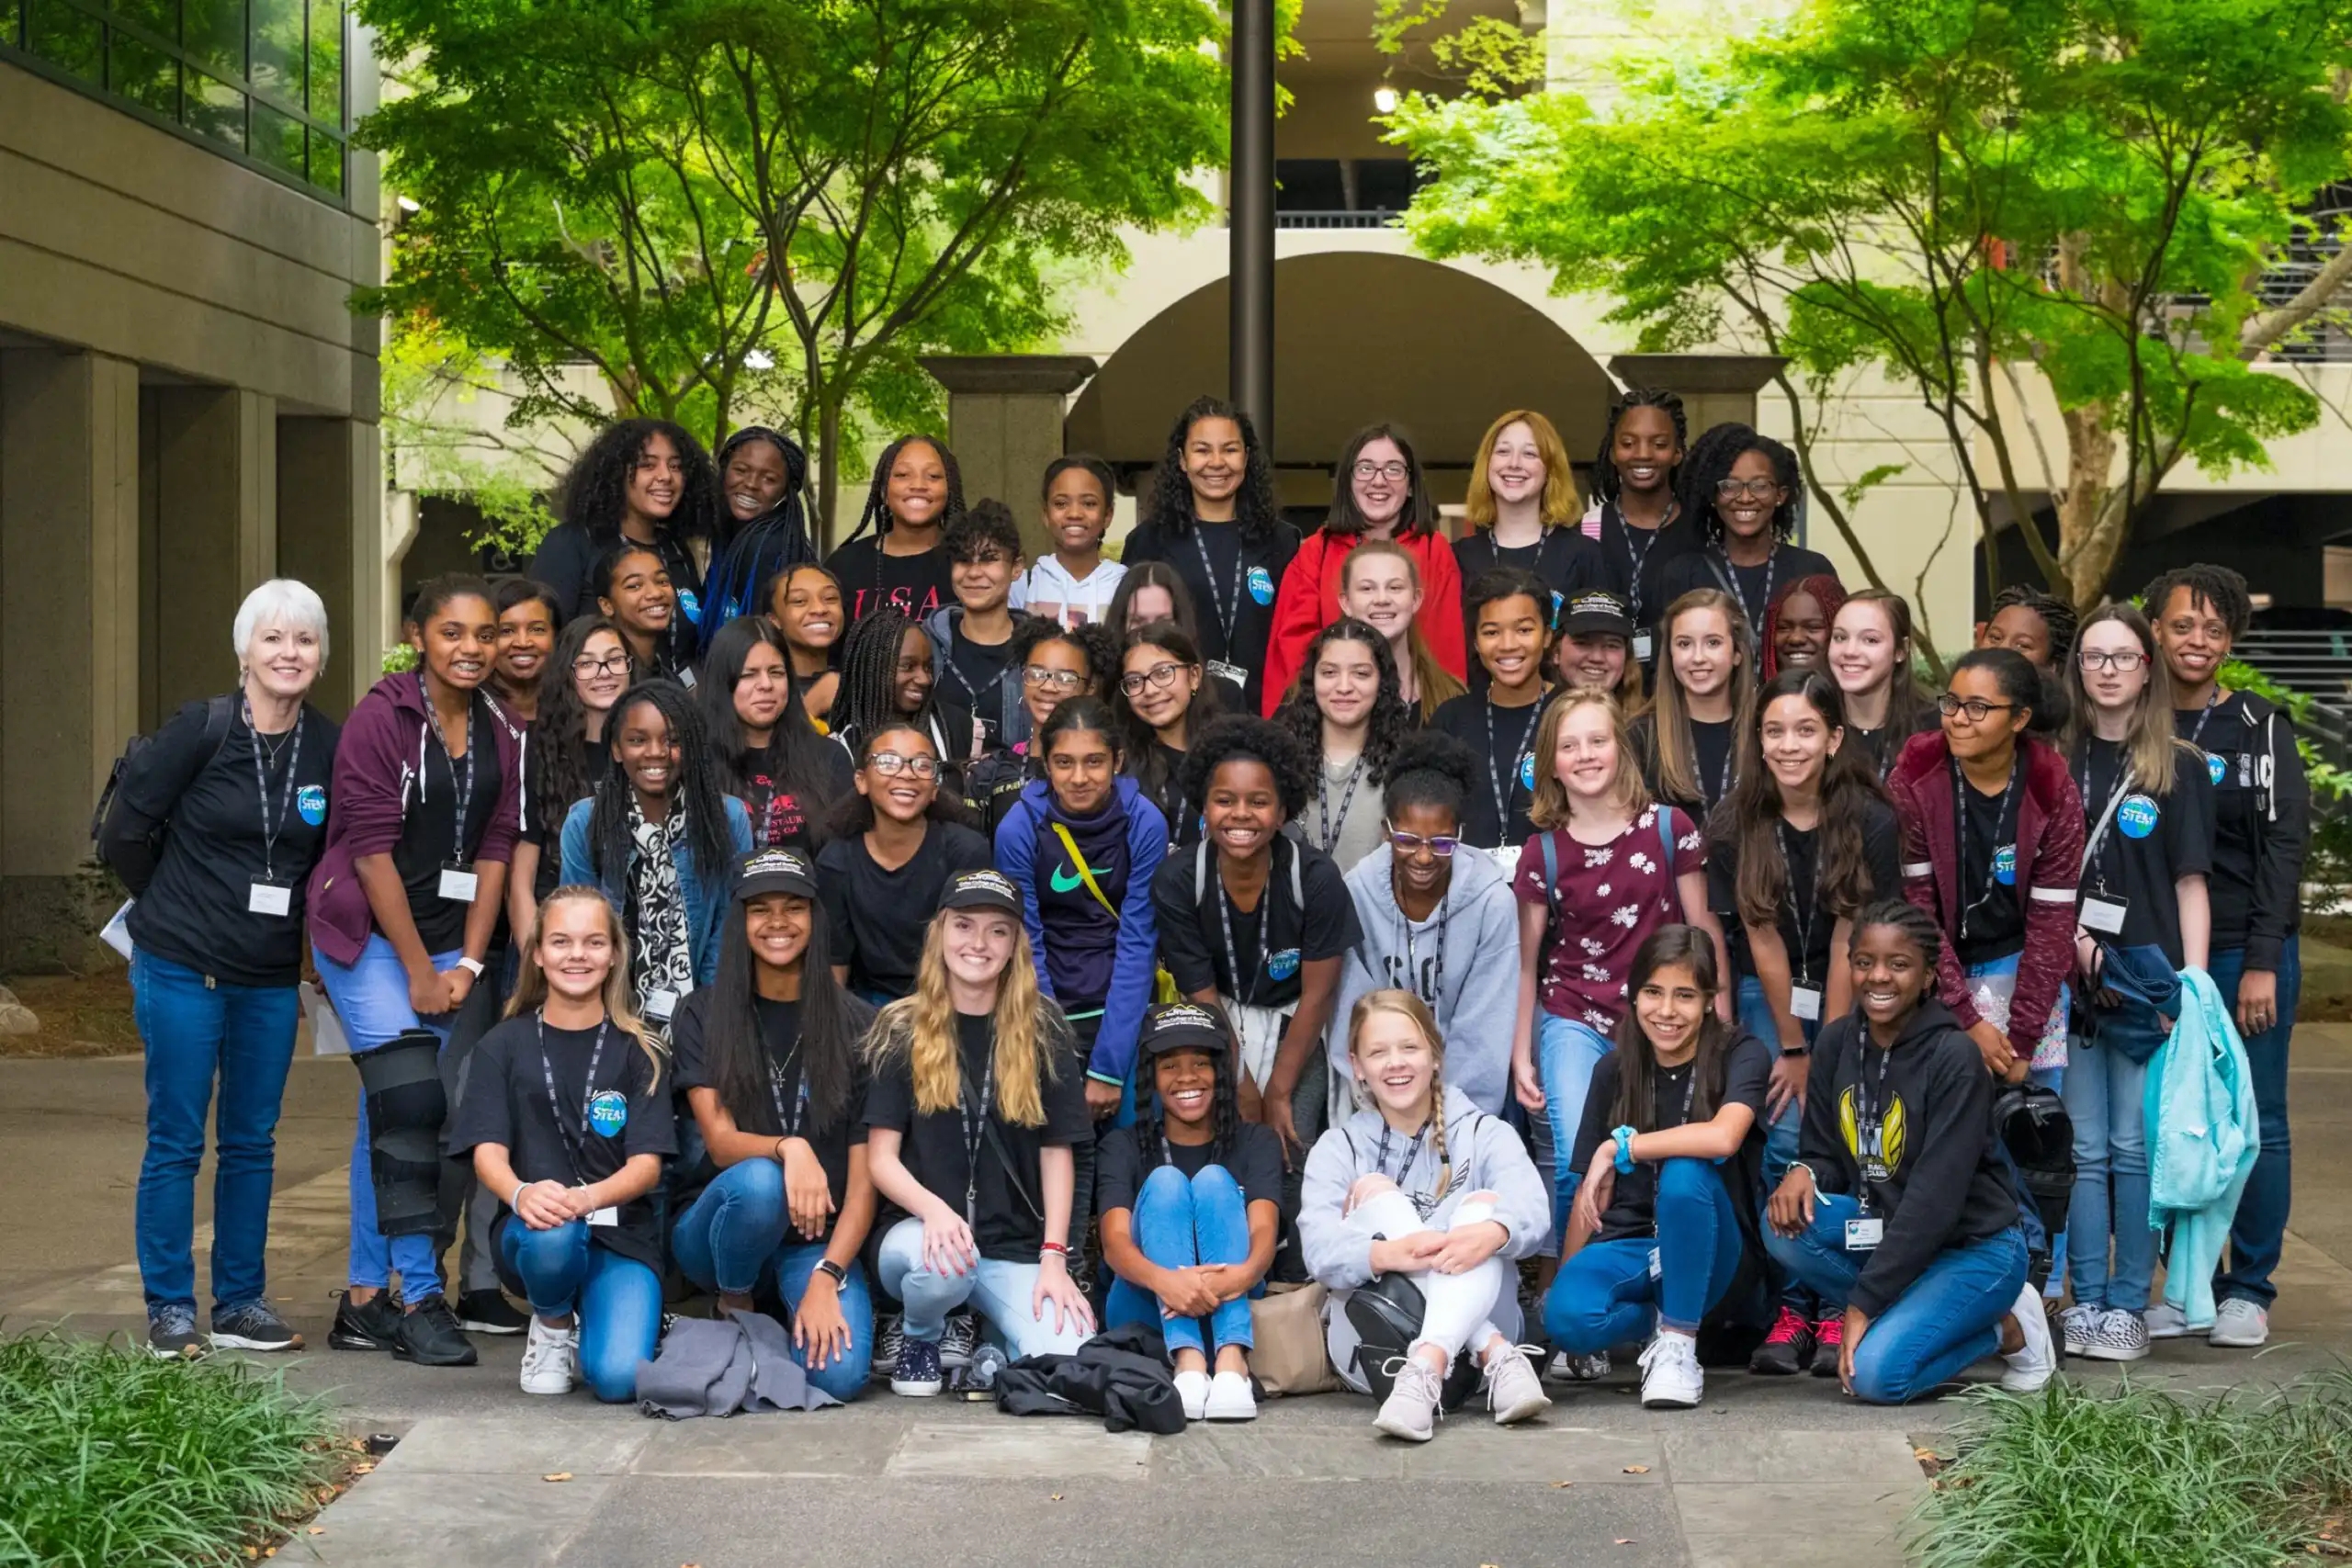 Group photo of CyberDay4Girls participants and mentors